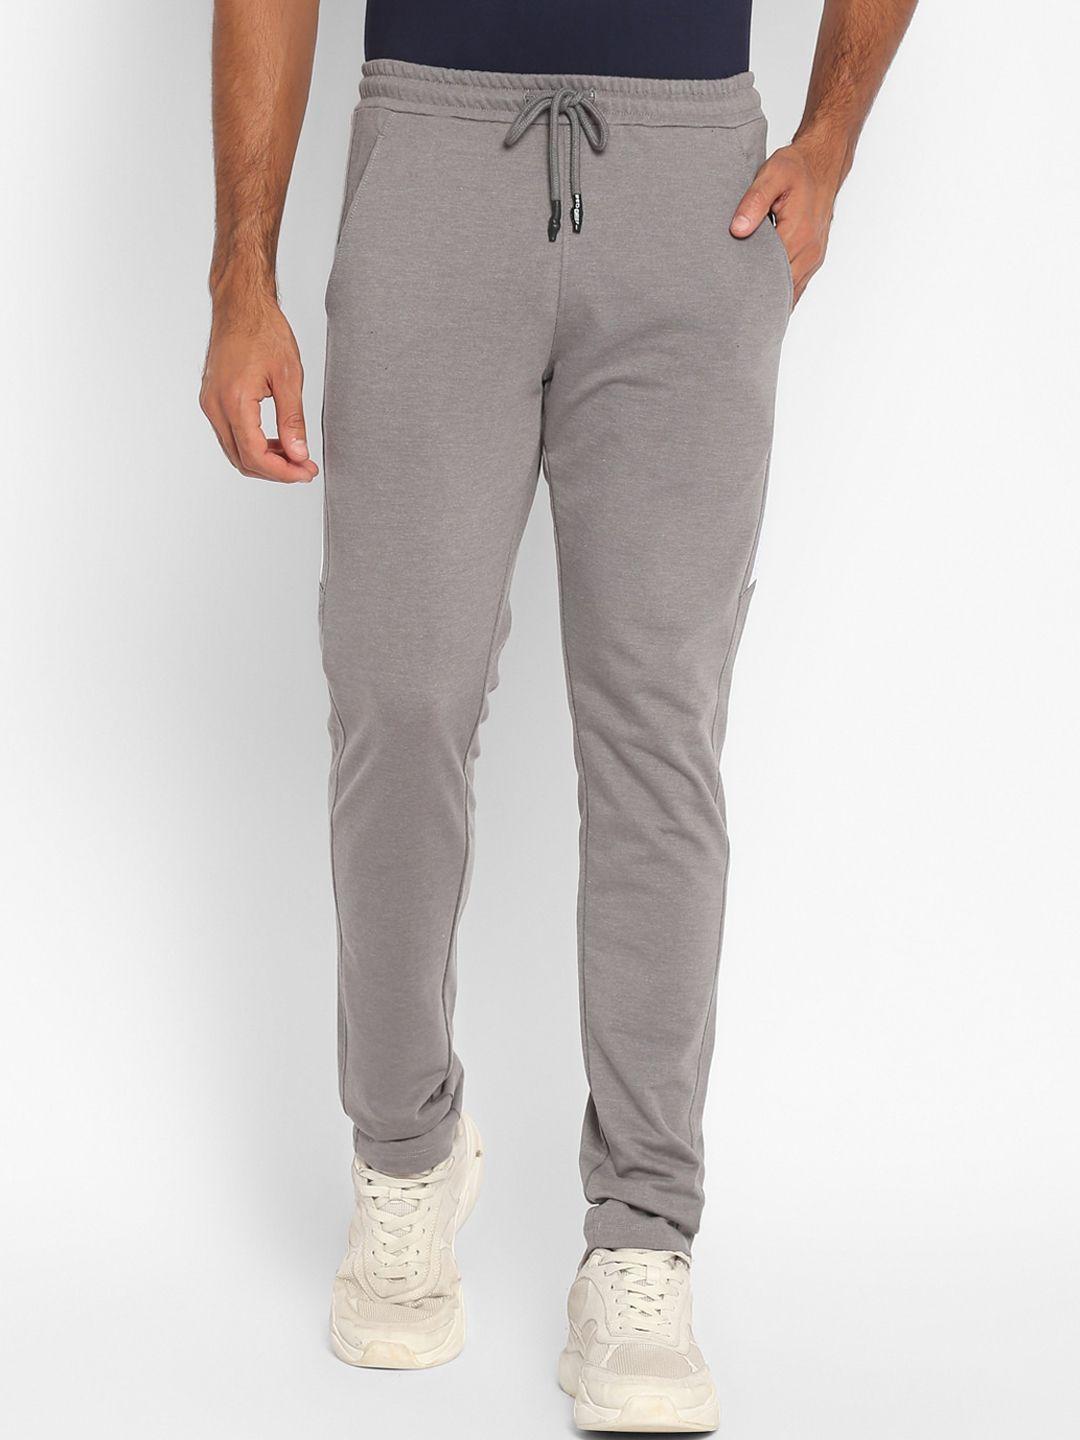 red-chief-men-grey-&-white-striped-slim-fit-track-pant